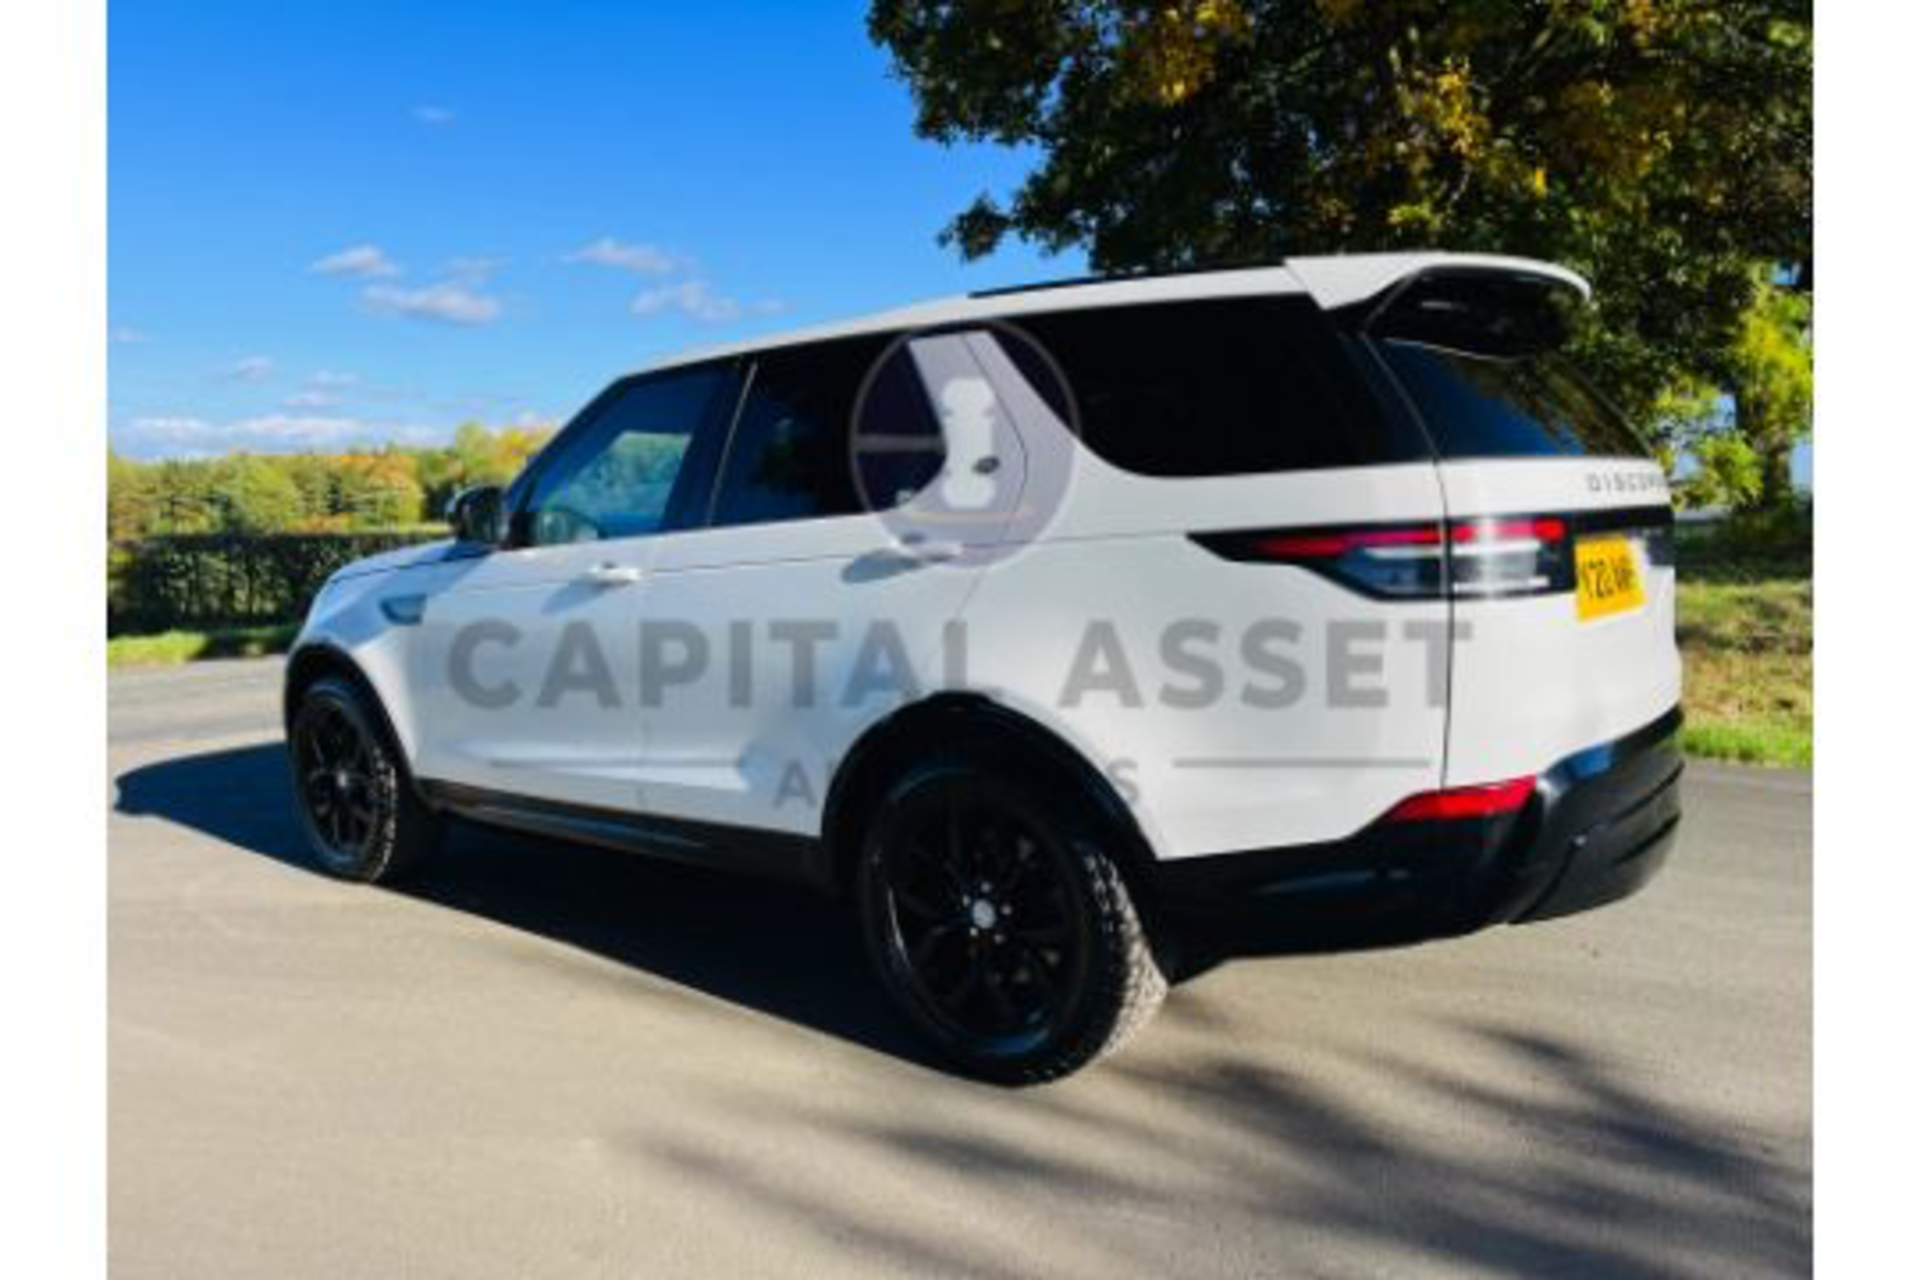 (ON SALE) LAND ROVER DISCOVERY 5 "SDV6 3.0" 'AUTO' 20 REG -1 OWNER -LEATHER- SAT NAV - NO VAT - Image 8 of 36